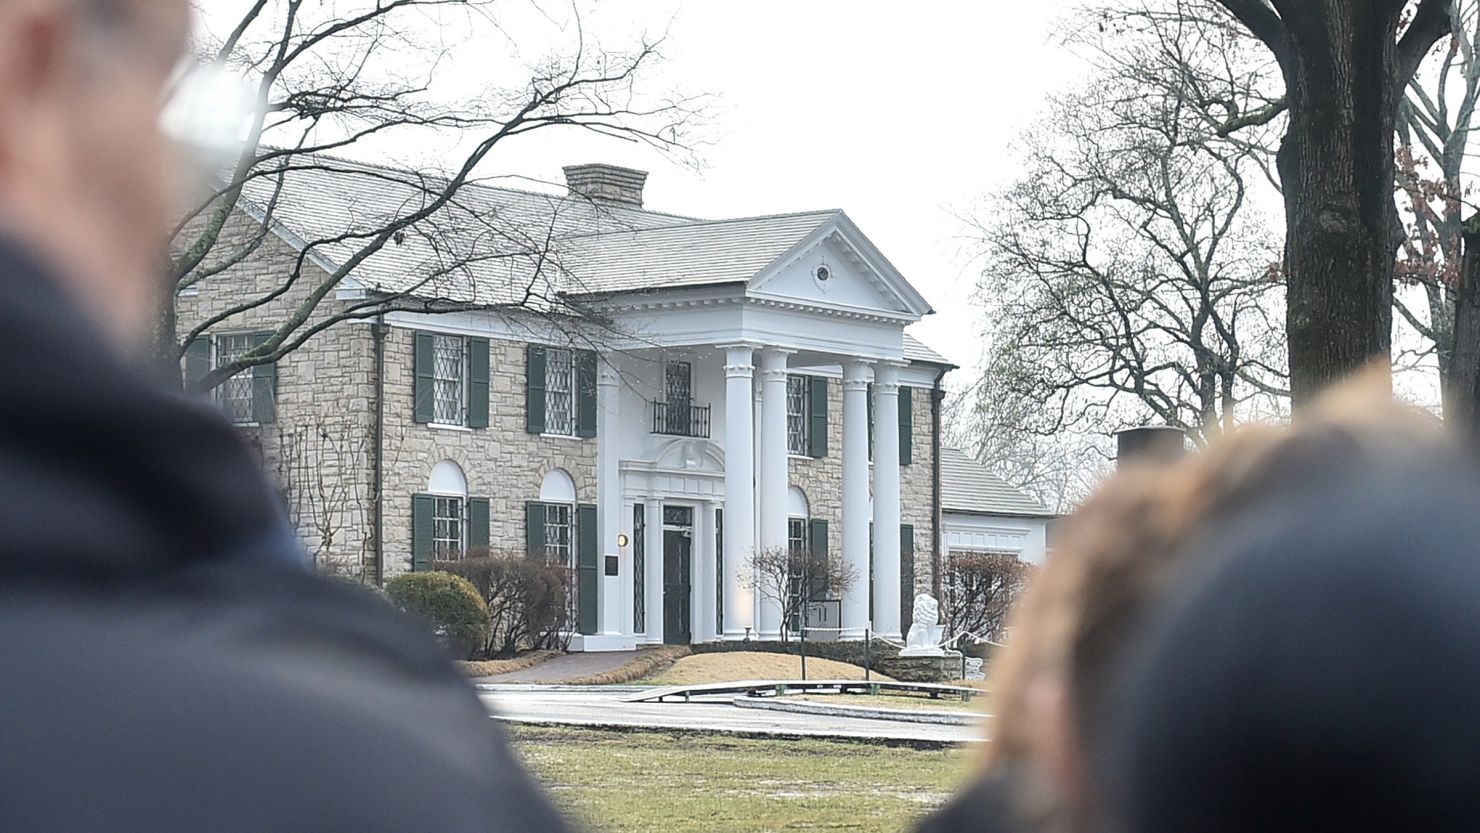 Fans gather outside Graceland to pay their respects at the memorial for Lisa Marie Presley on January 22, 2023 in Memphis, Tennessee. Last month, Elvis Presley's iconic Memphis home was nearly auctioned off by a seemingly fraudulent company.